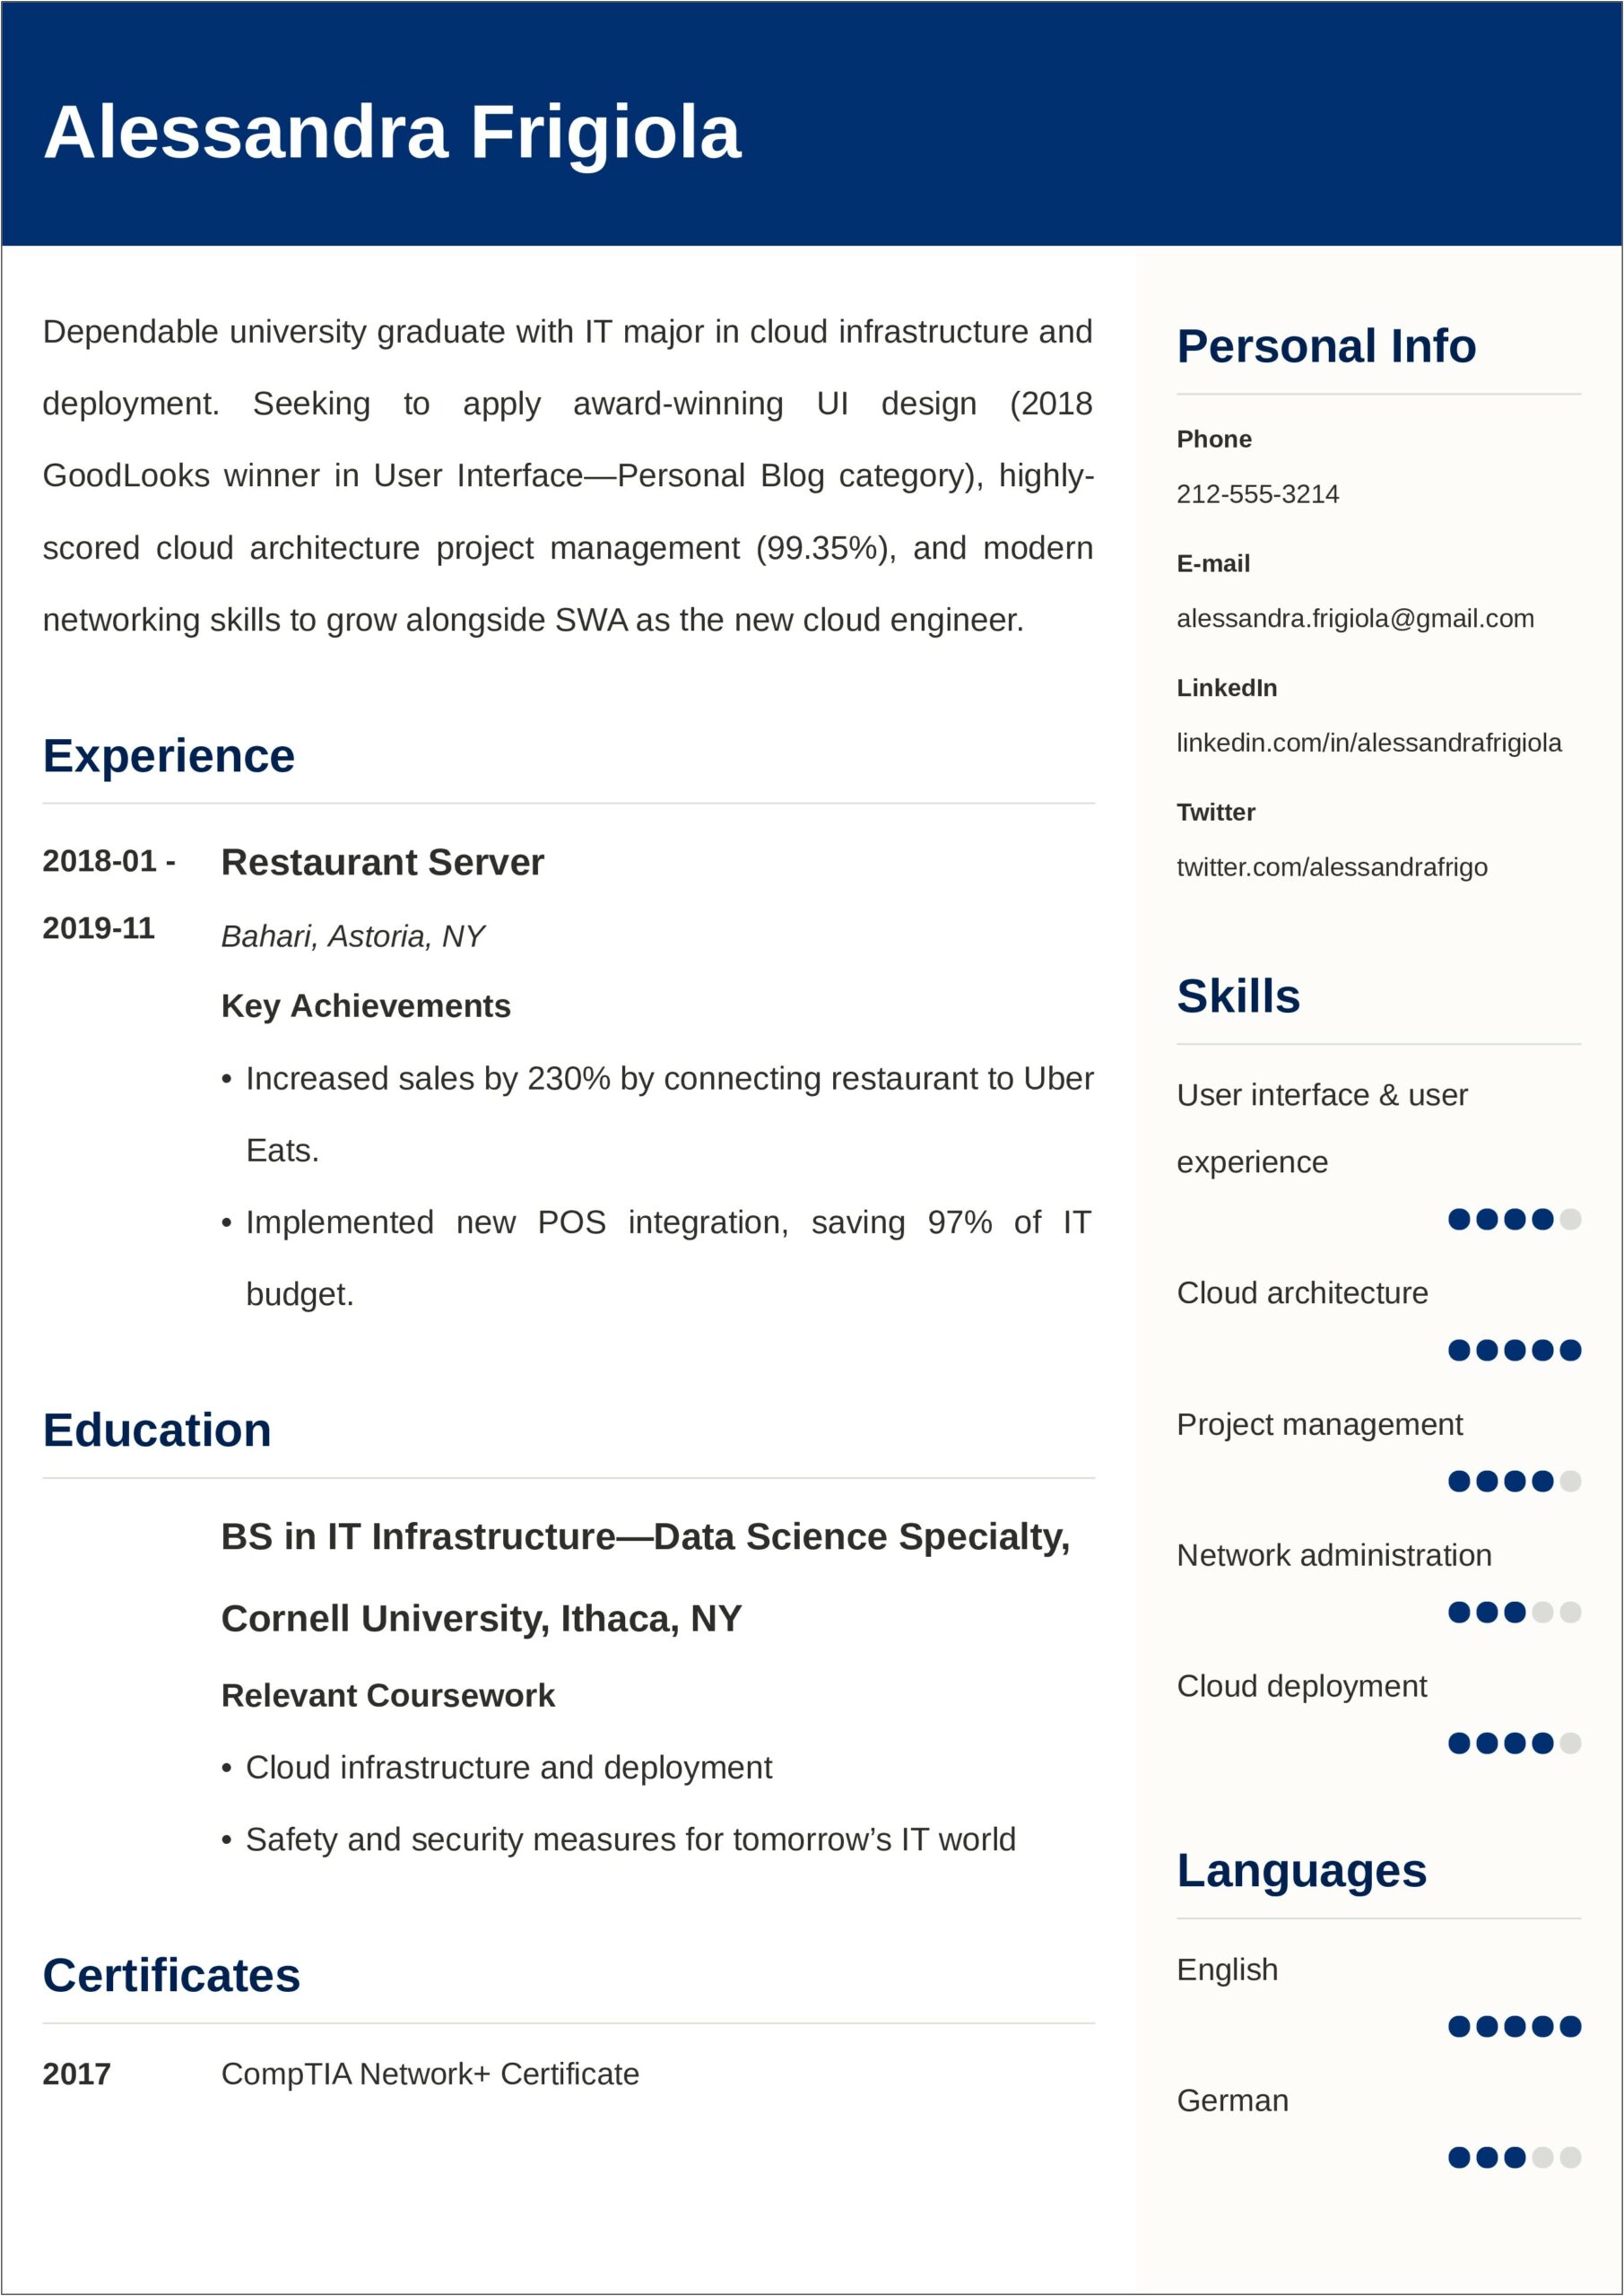 Sample Resume For Director Of Religious Education